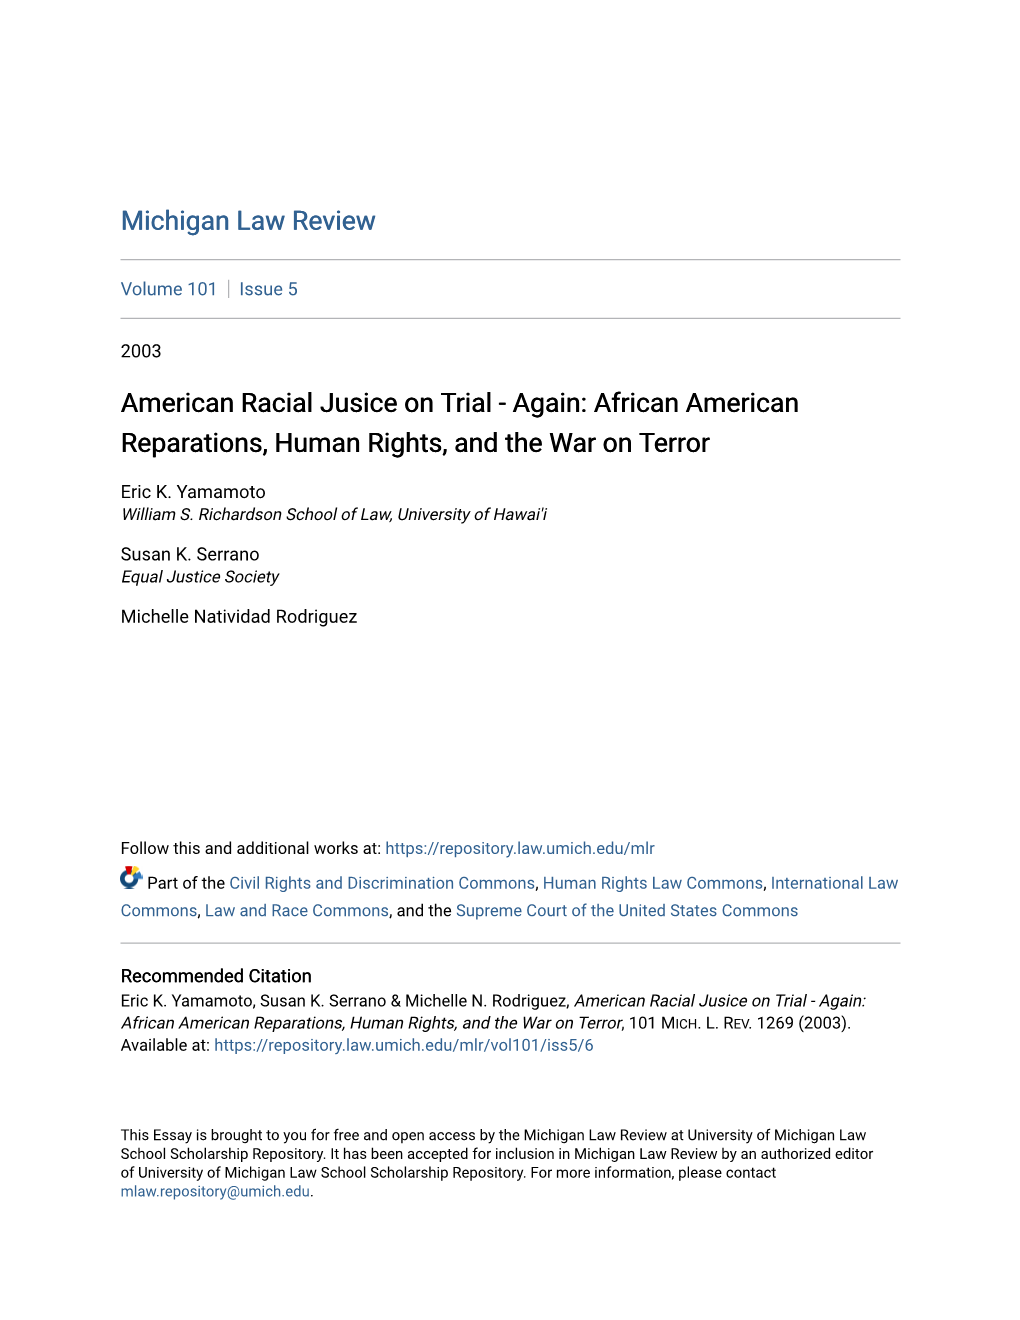 African American Reparations, Human Rights, and the War on Terror